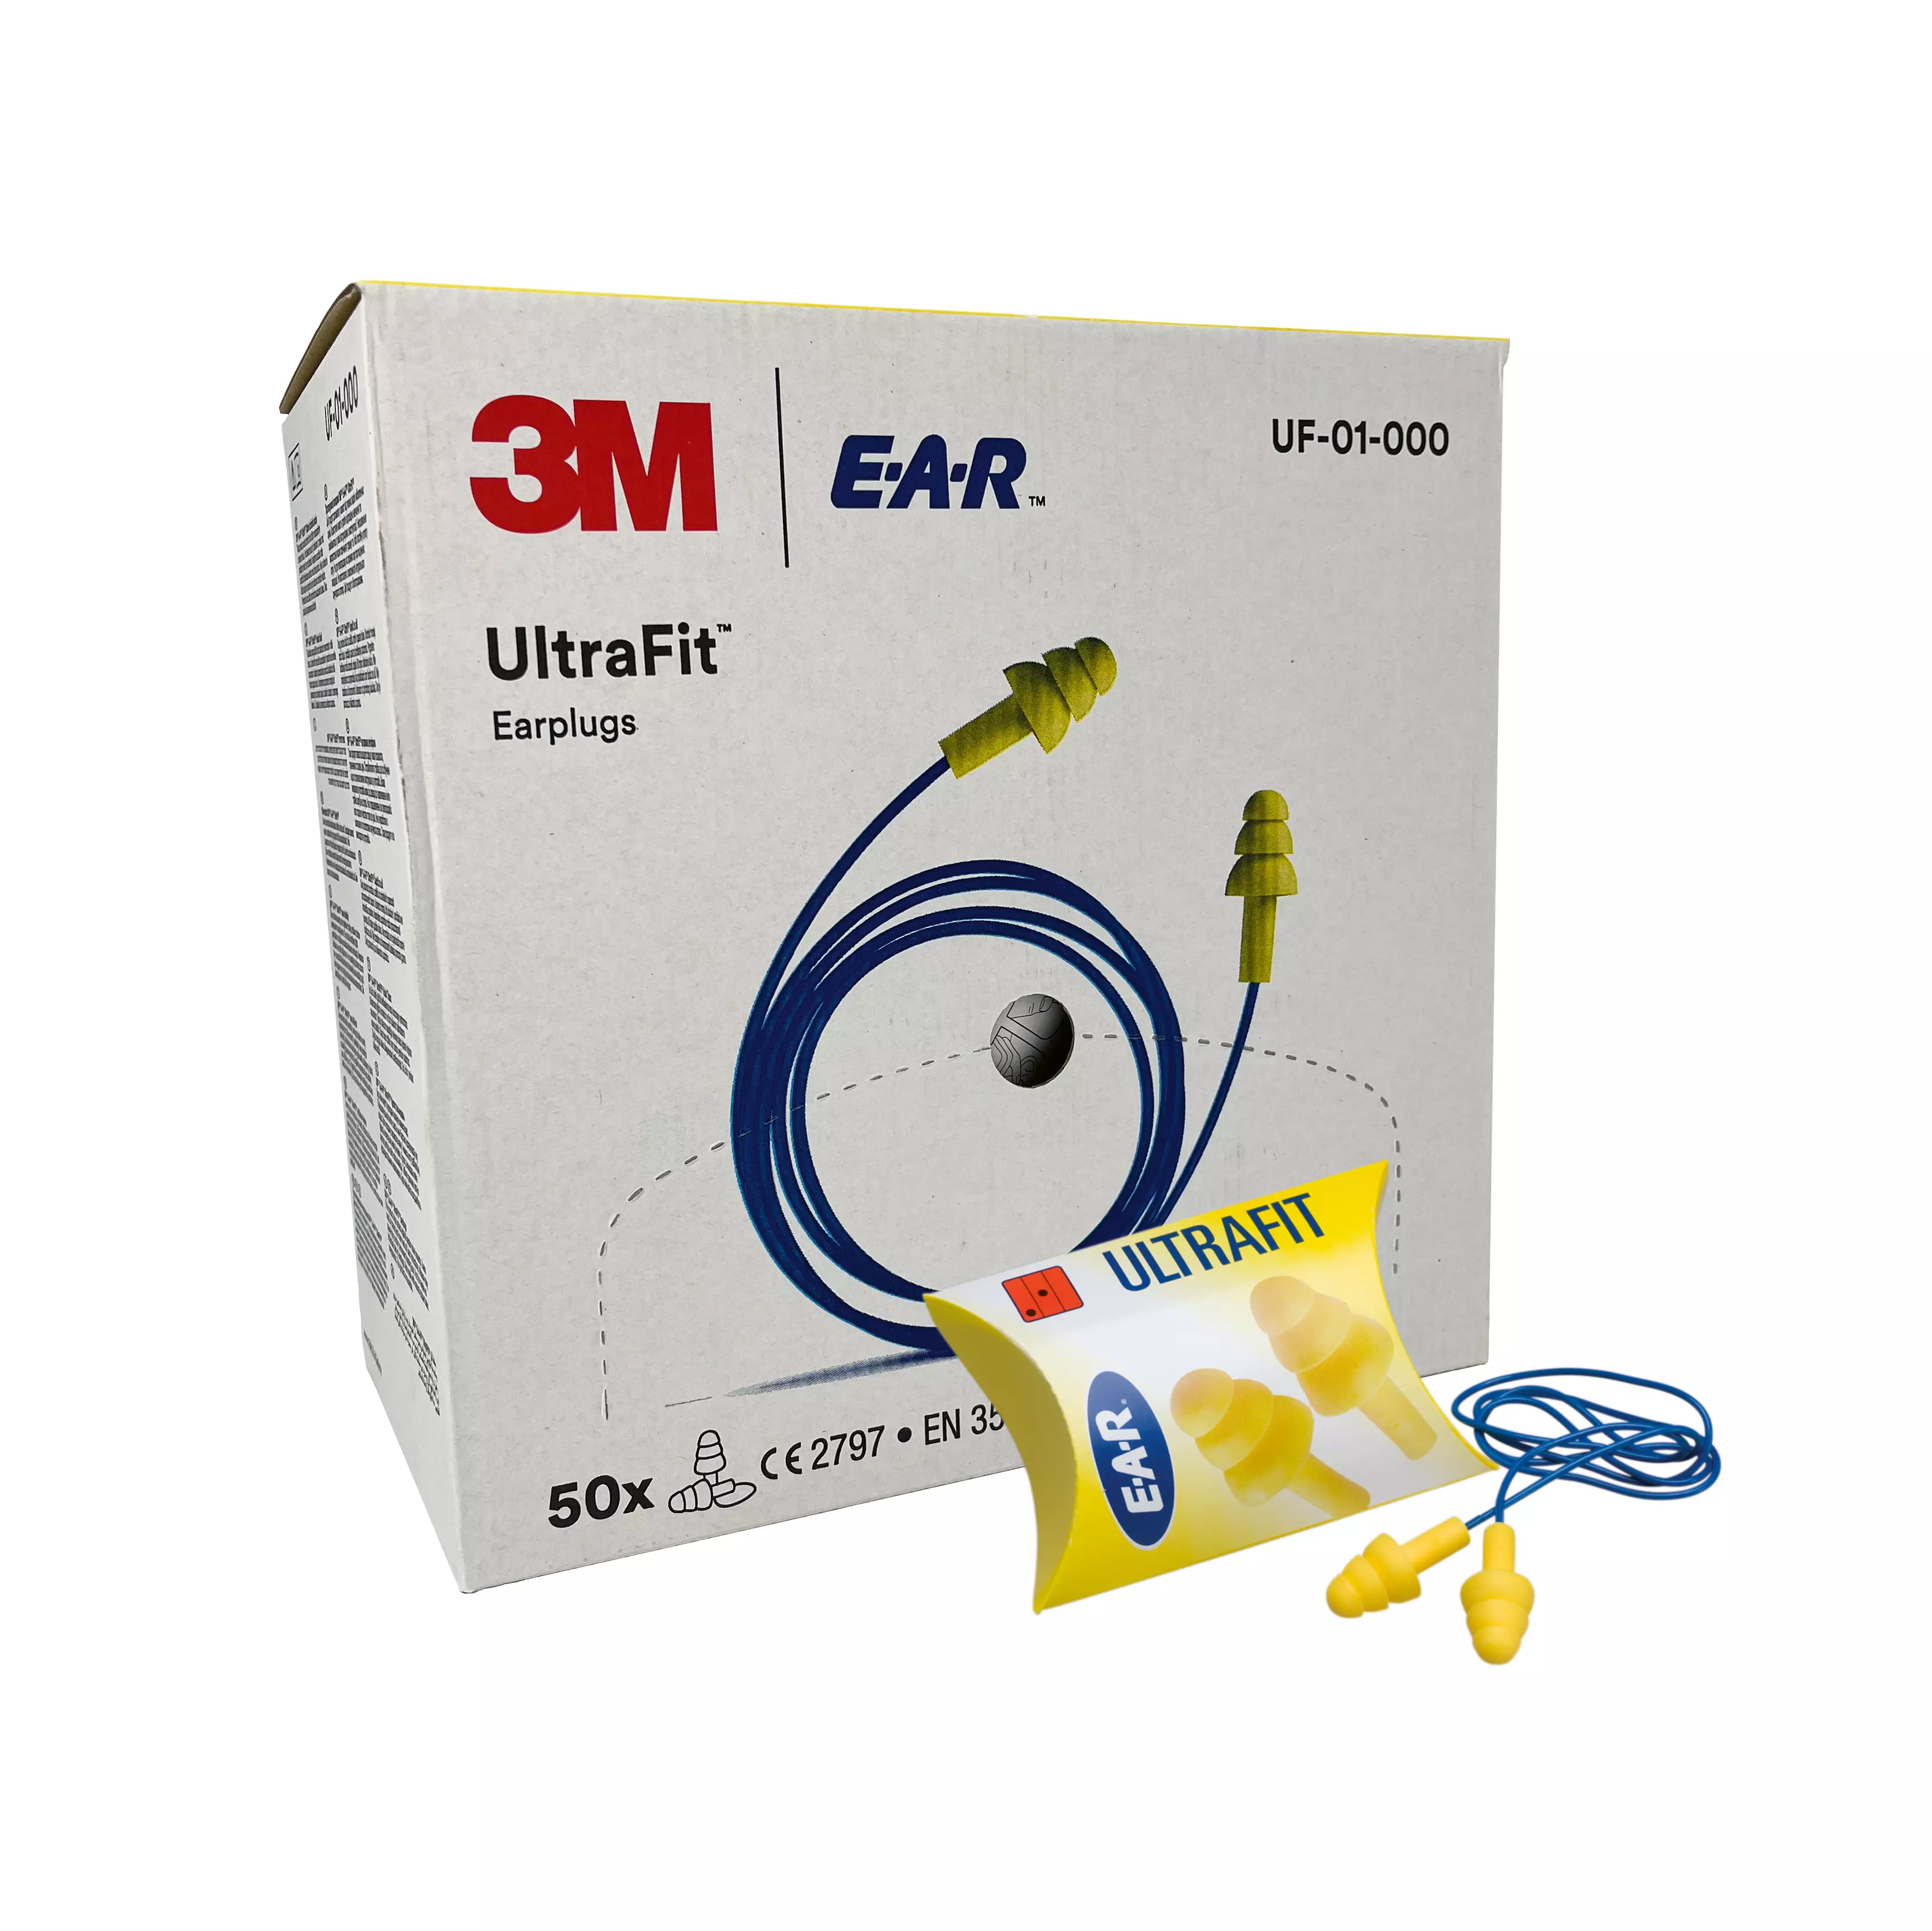 3M E-A-R ULTRAFIT, earplugs with cord, 50 pairs